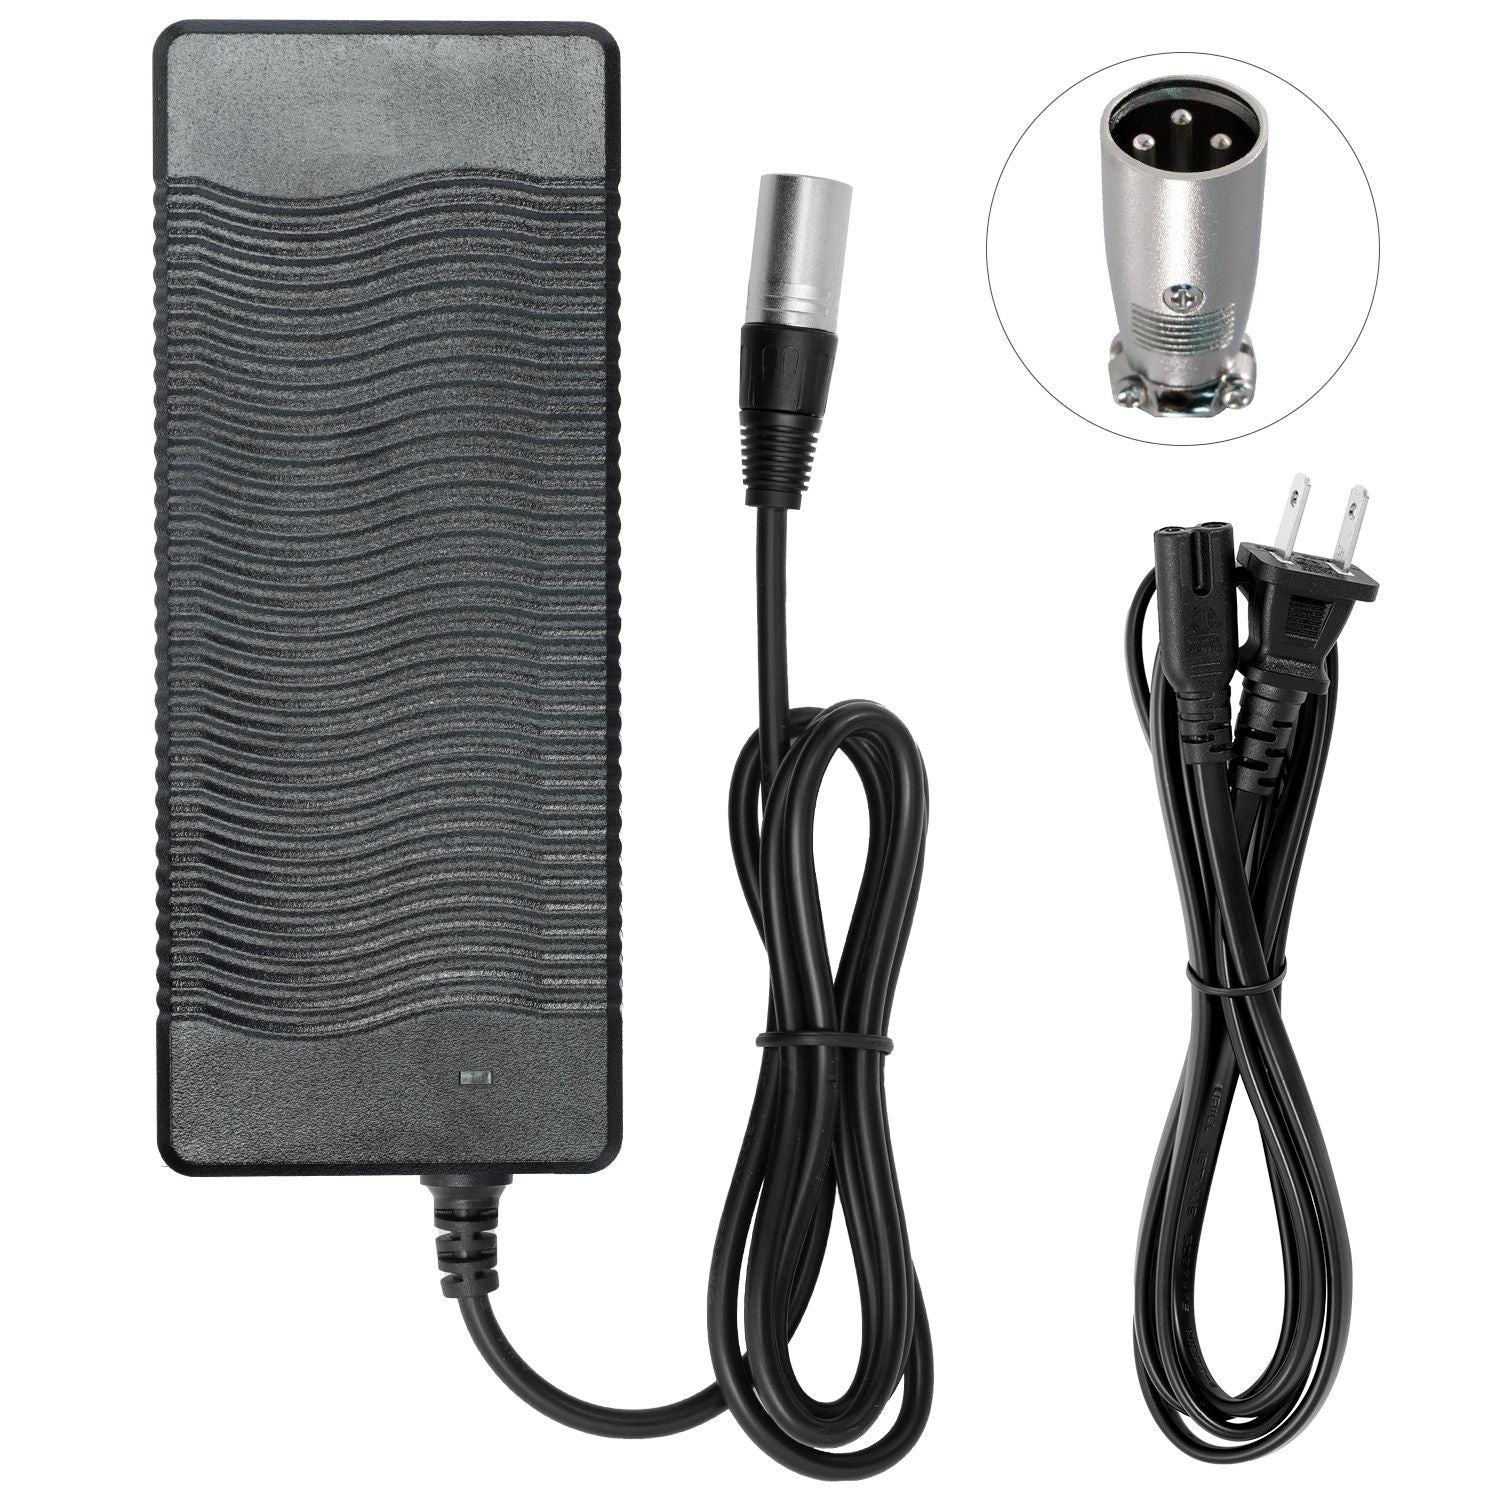 Charger for Pedego Boomerang eBike